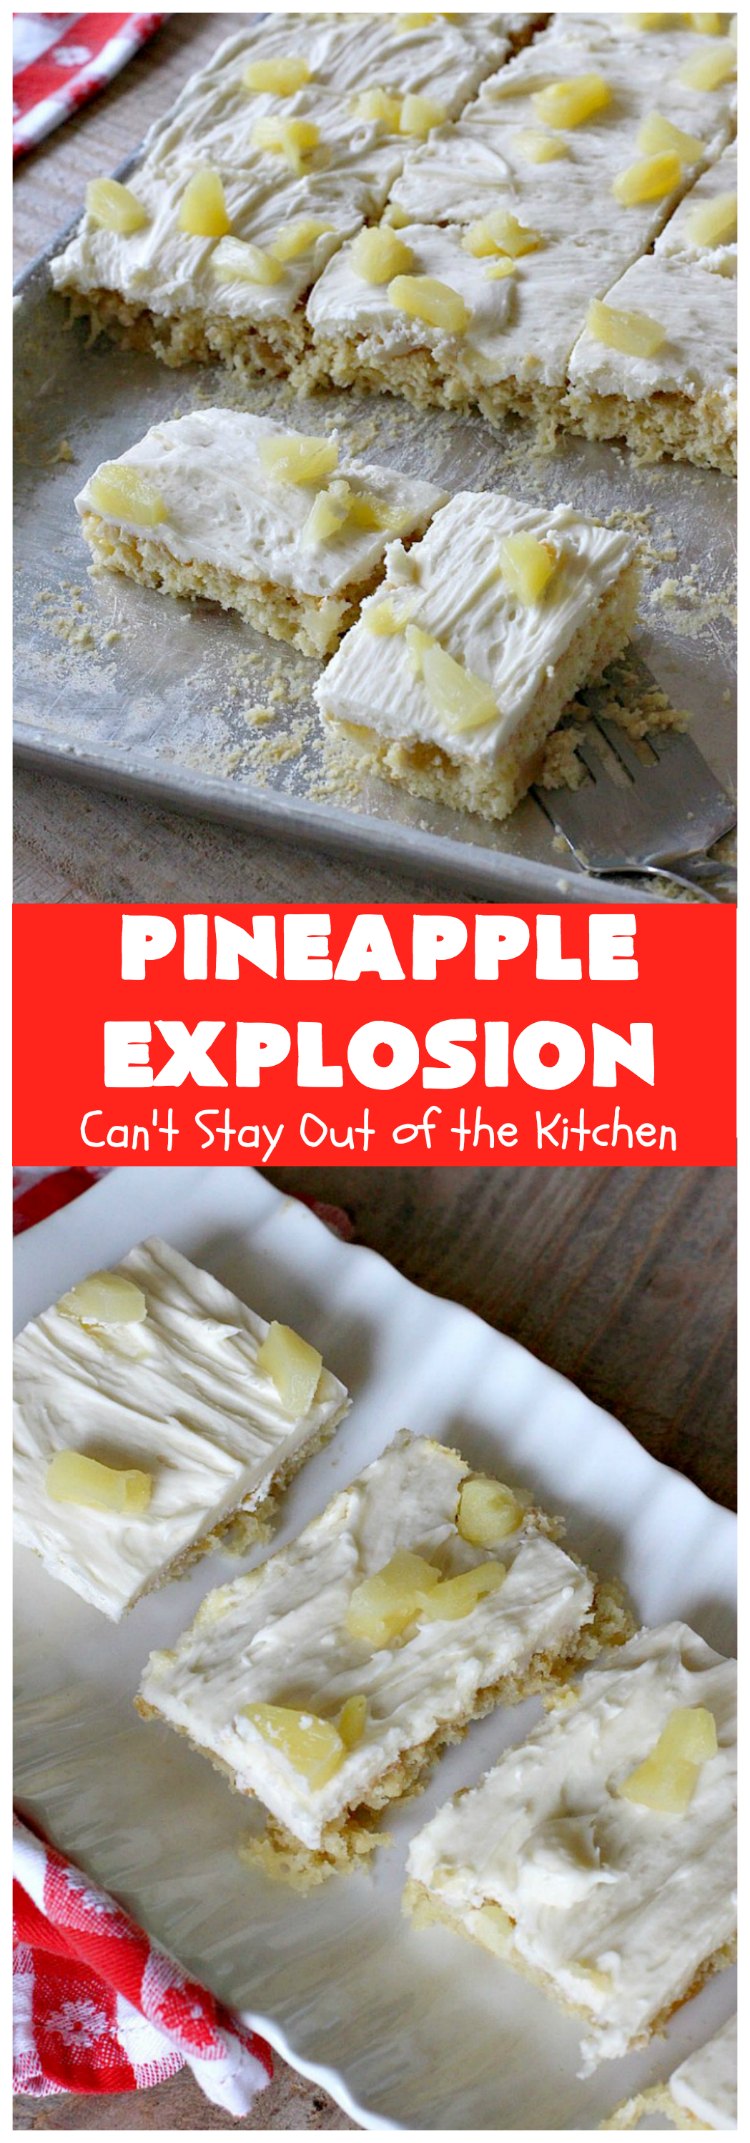 Pineapple Explosion | Can't Stay Out of the Kitchen | get quadruple the #pineapple whammy with #PineappleCakeMix &  #PineapplePieFilling in the #cake & #PineappleExtract & #PineappleTidbits in the luscious #CreamCheese icing! Knock the socks off your company with this amazing #dessert! #Holiday #HolidayDessert #PineappleDessert #PineappleSheetCake #PineappleExplosion #PineappleExplosionCake